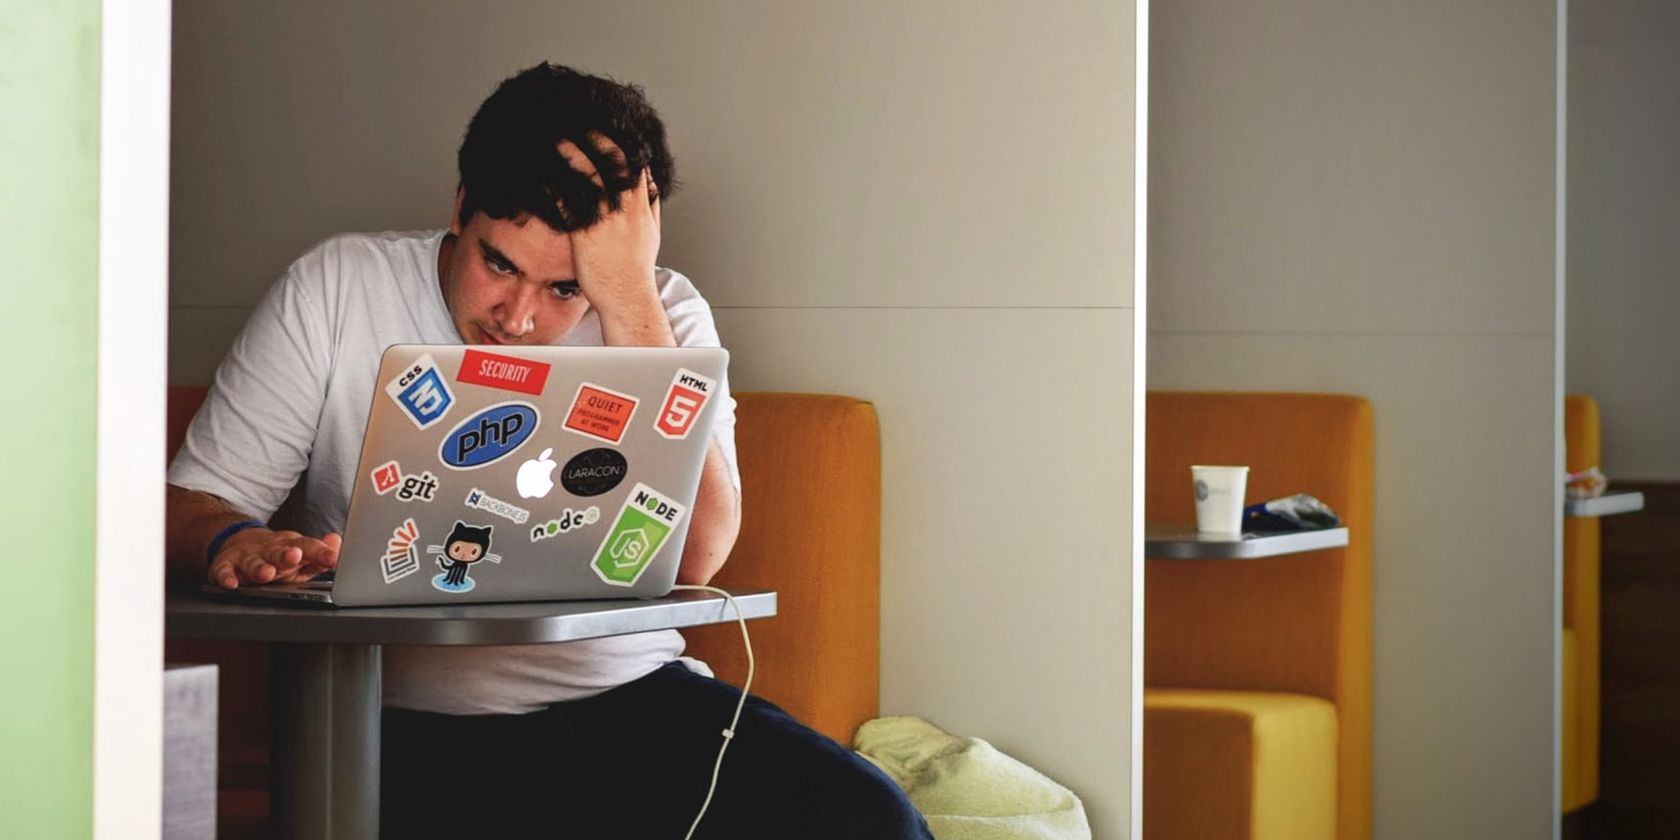 Stressed man using MacBook holding his head